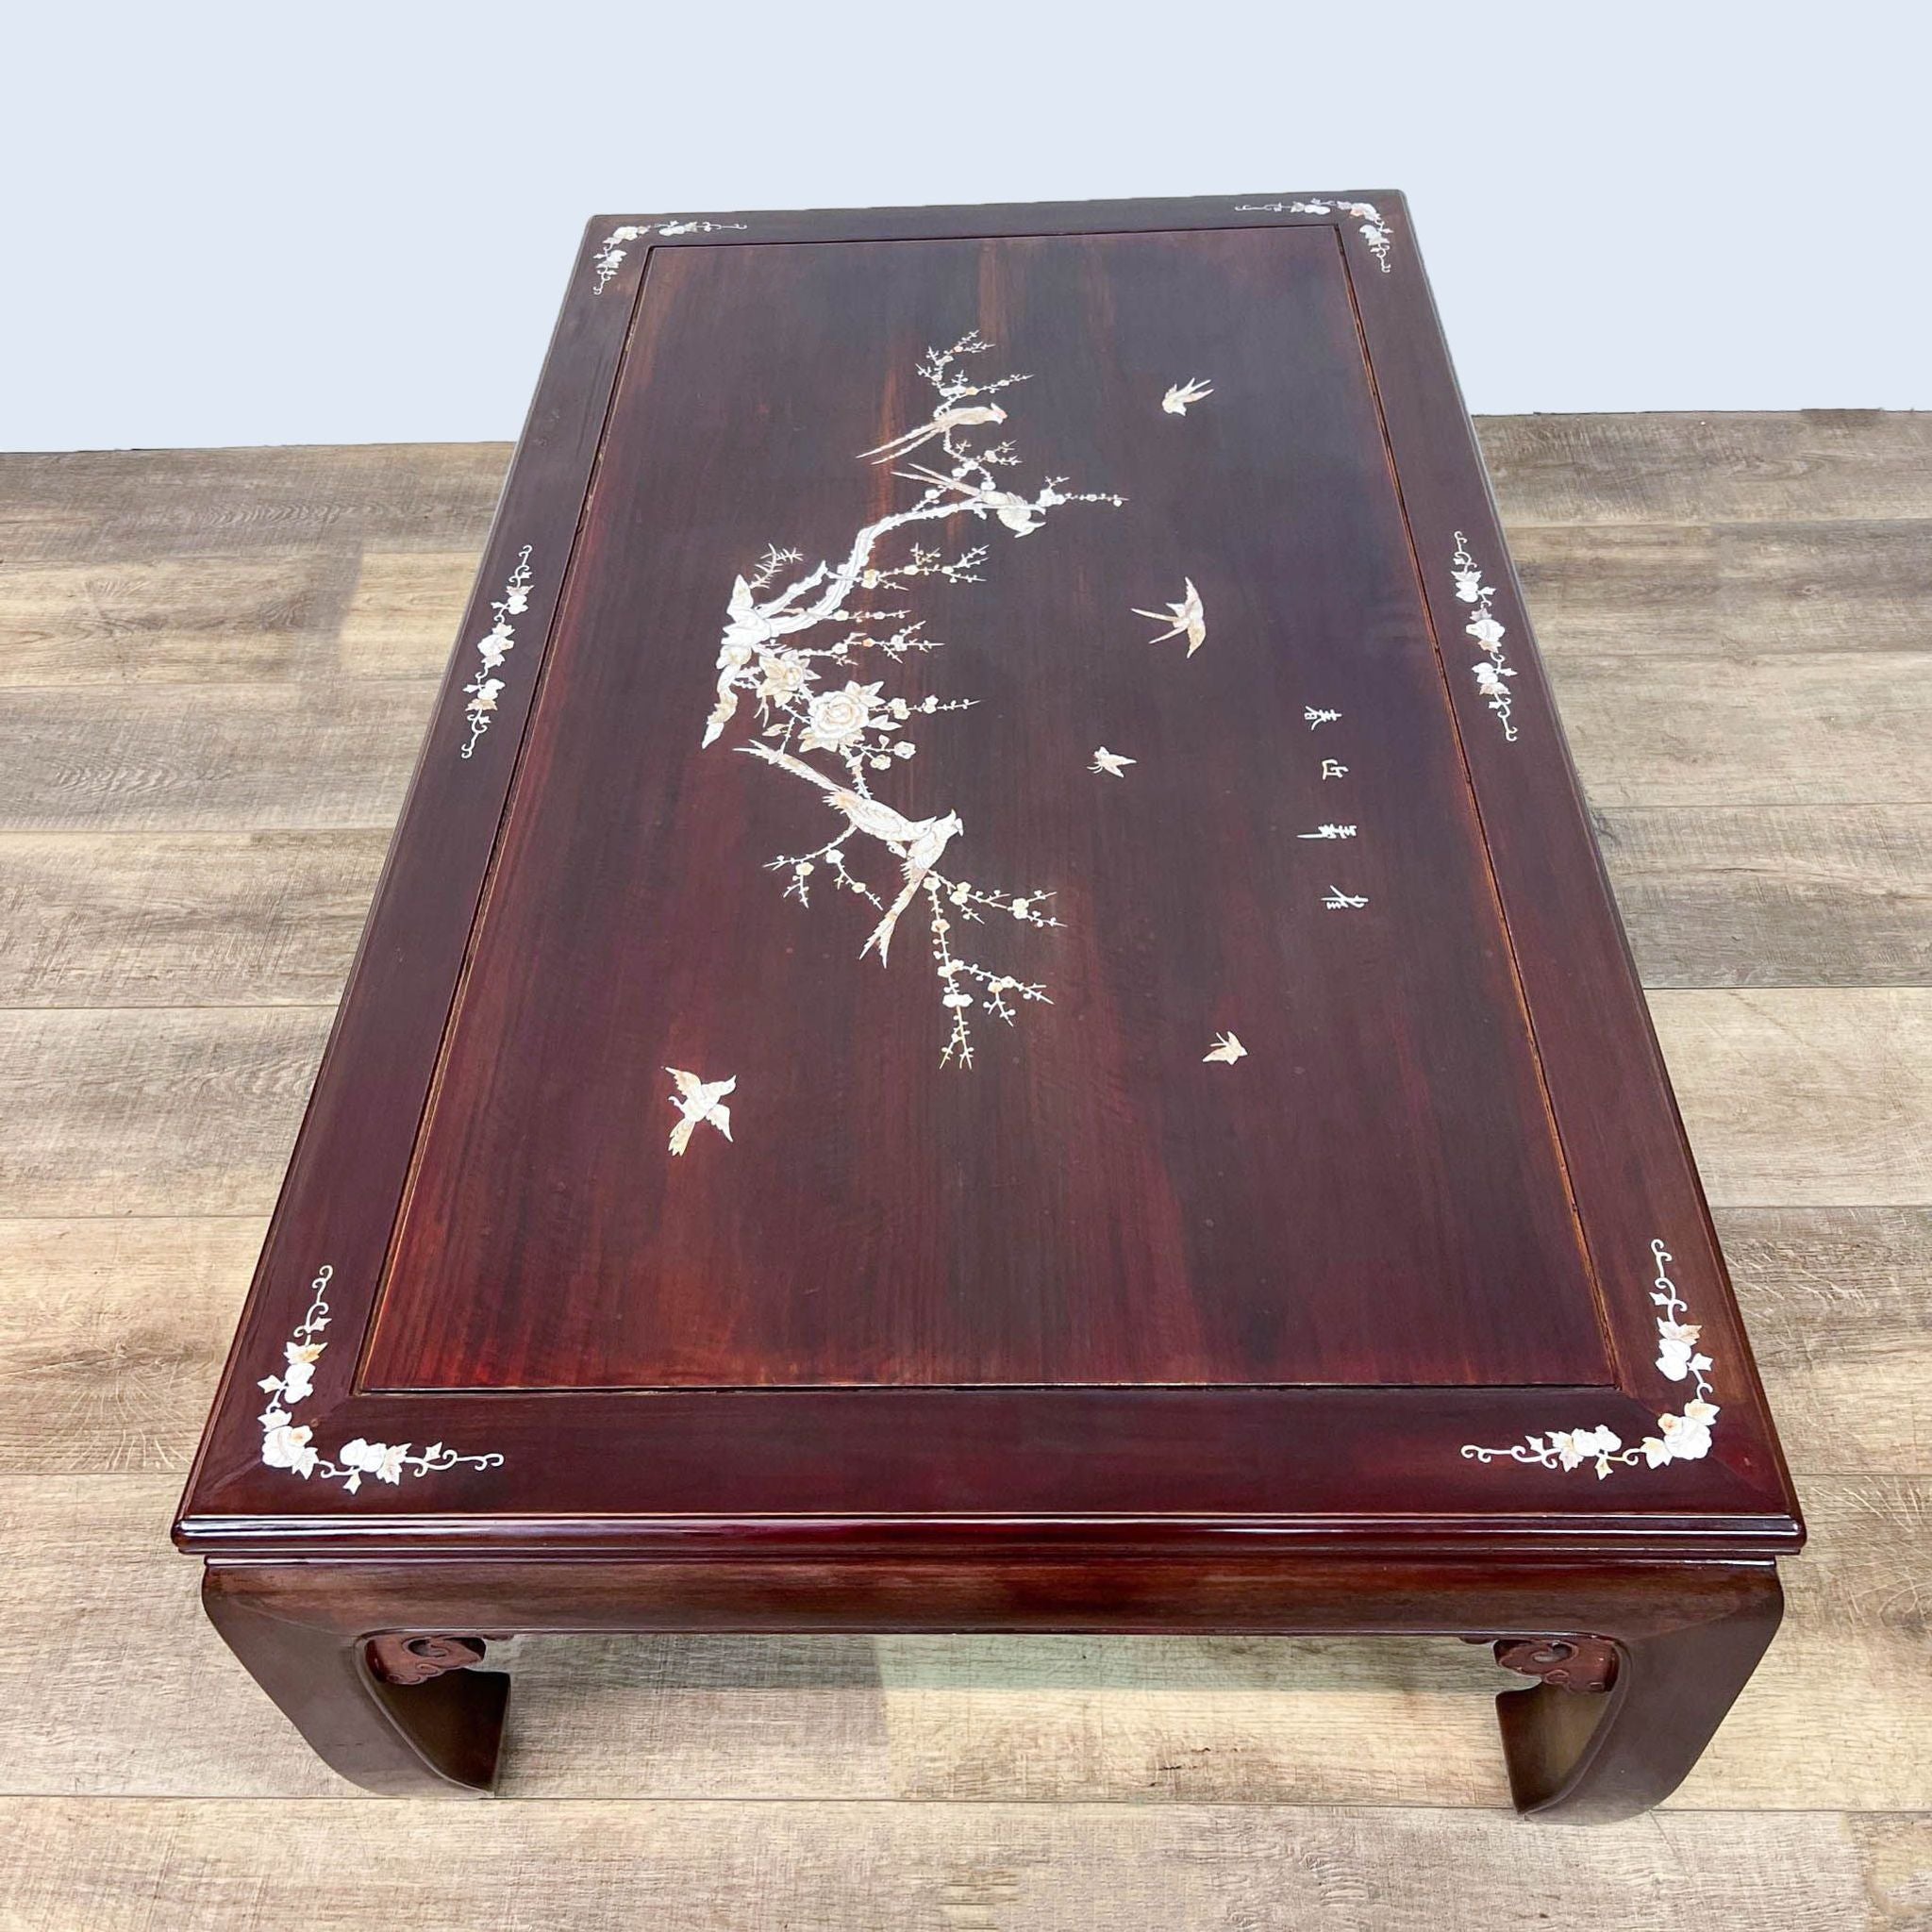 Reperch-brand coffee table with Mother of Pearl inlay depicting a cherry blossom motif on a dark wood background.